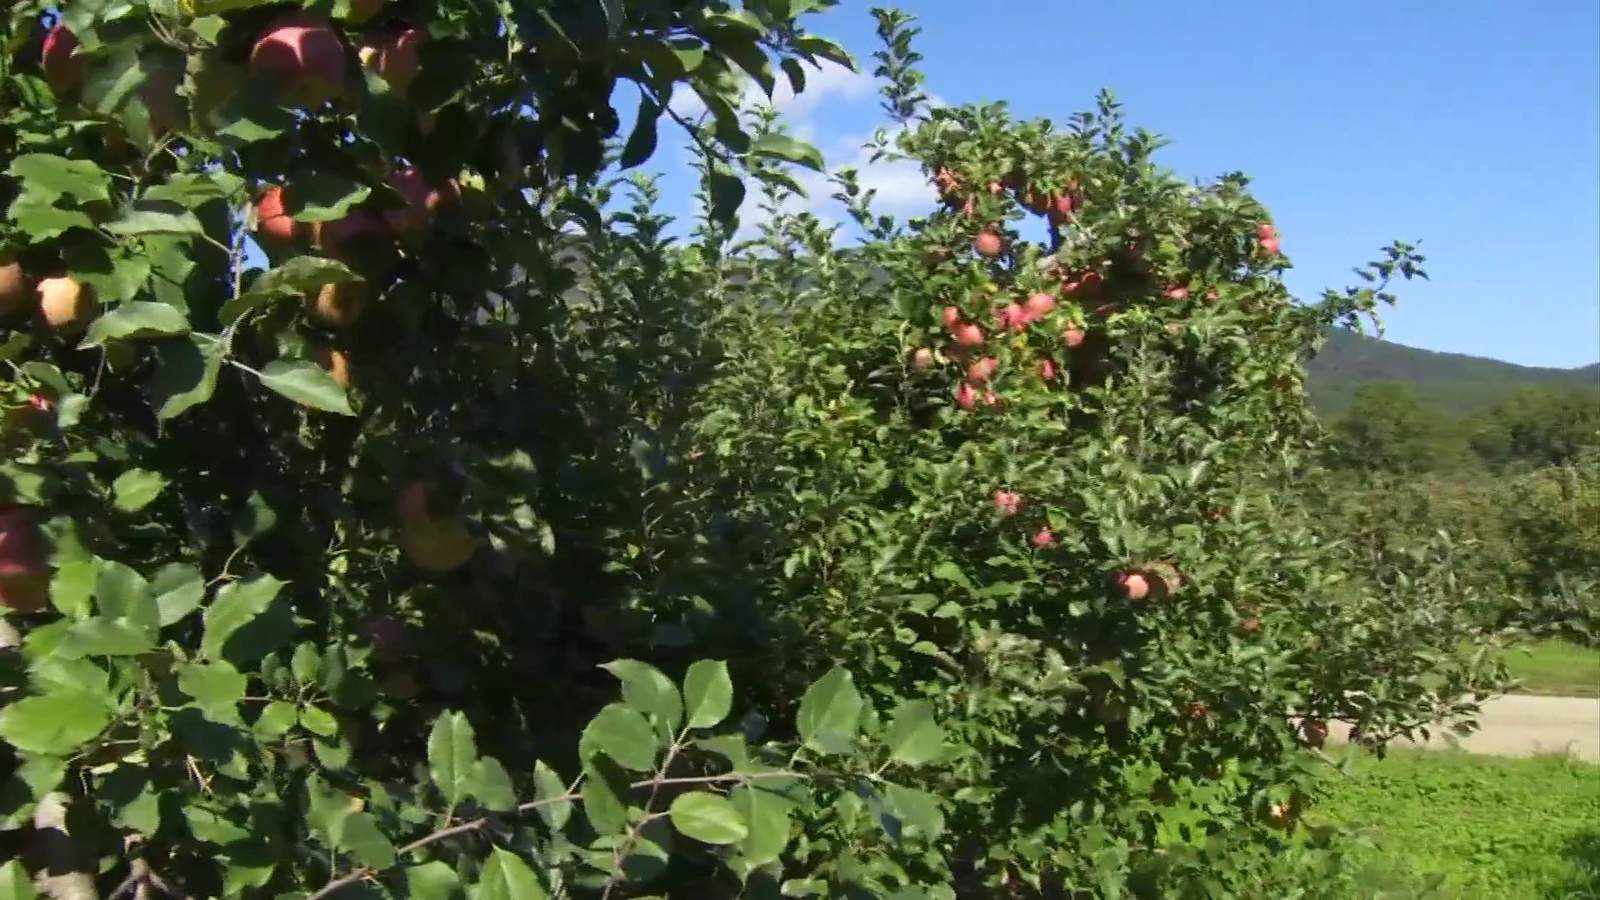 Lynchburg invites families on apple picking trip this weekend